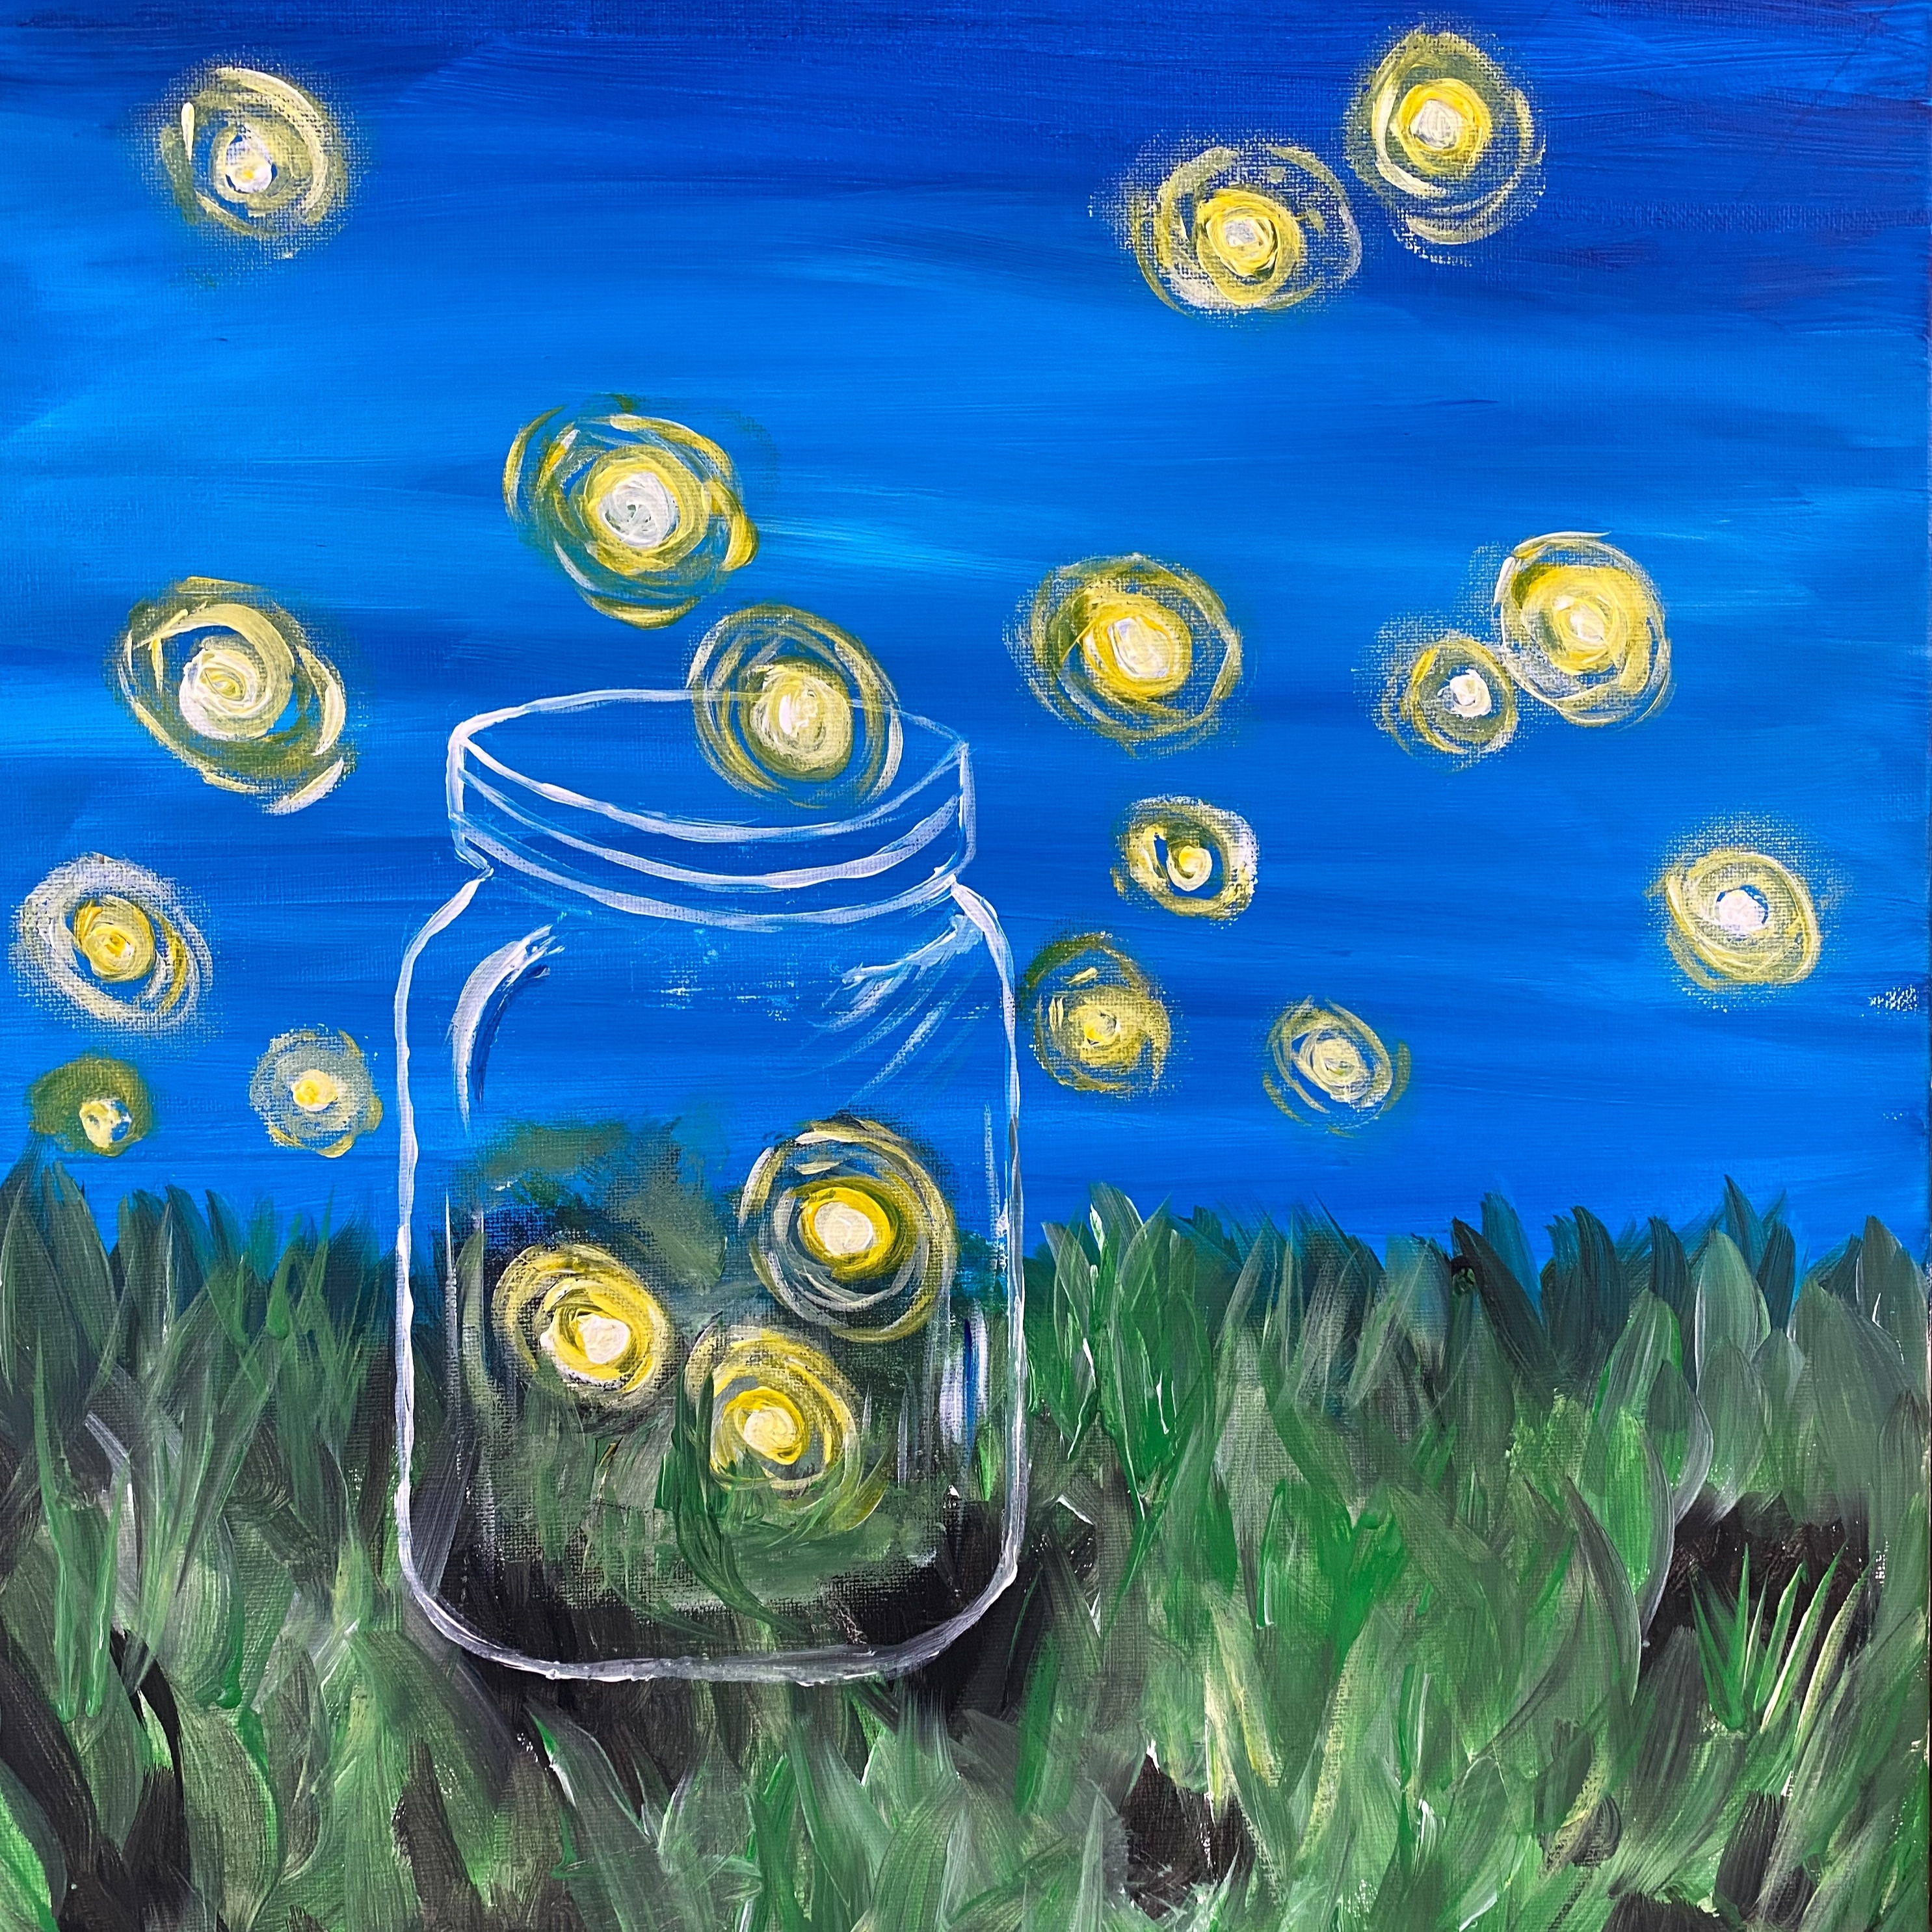 Painting of a field with fireflies in a jar